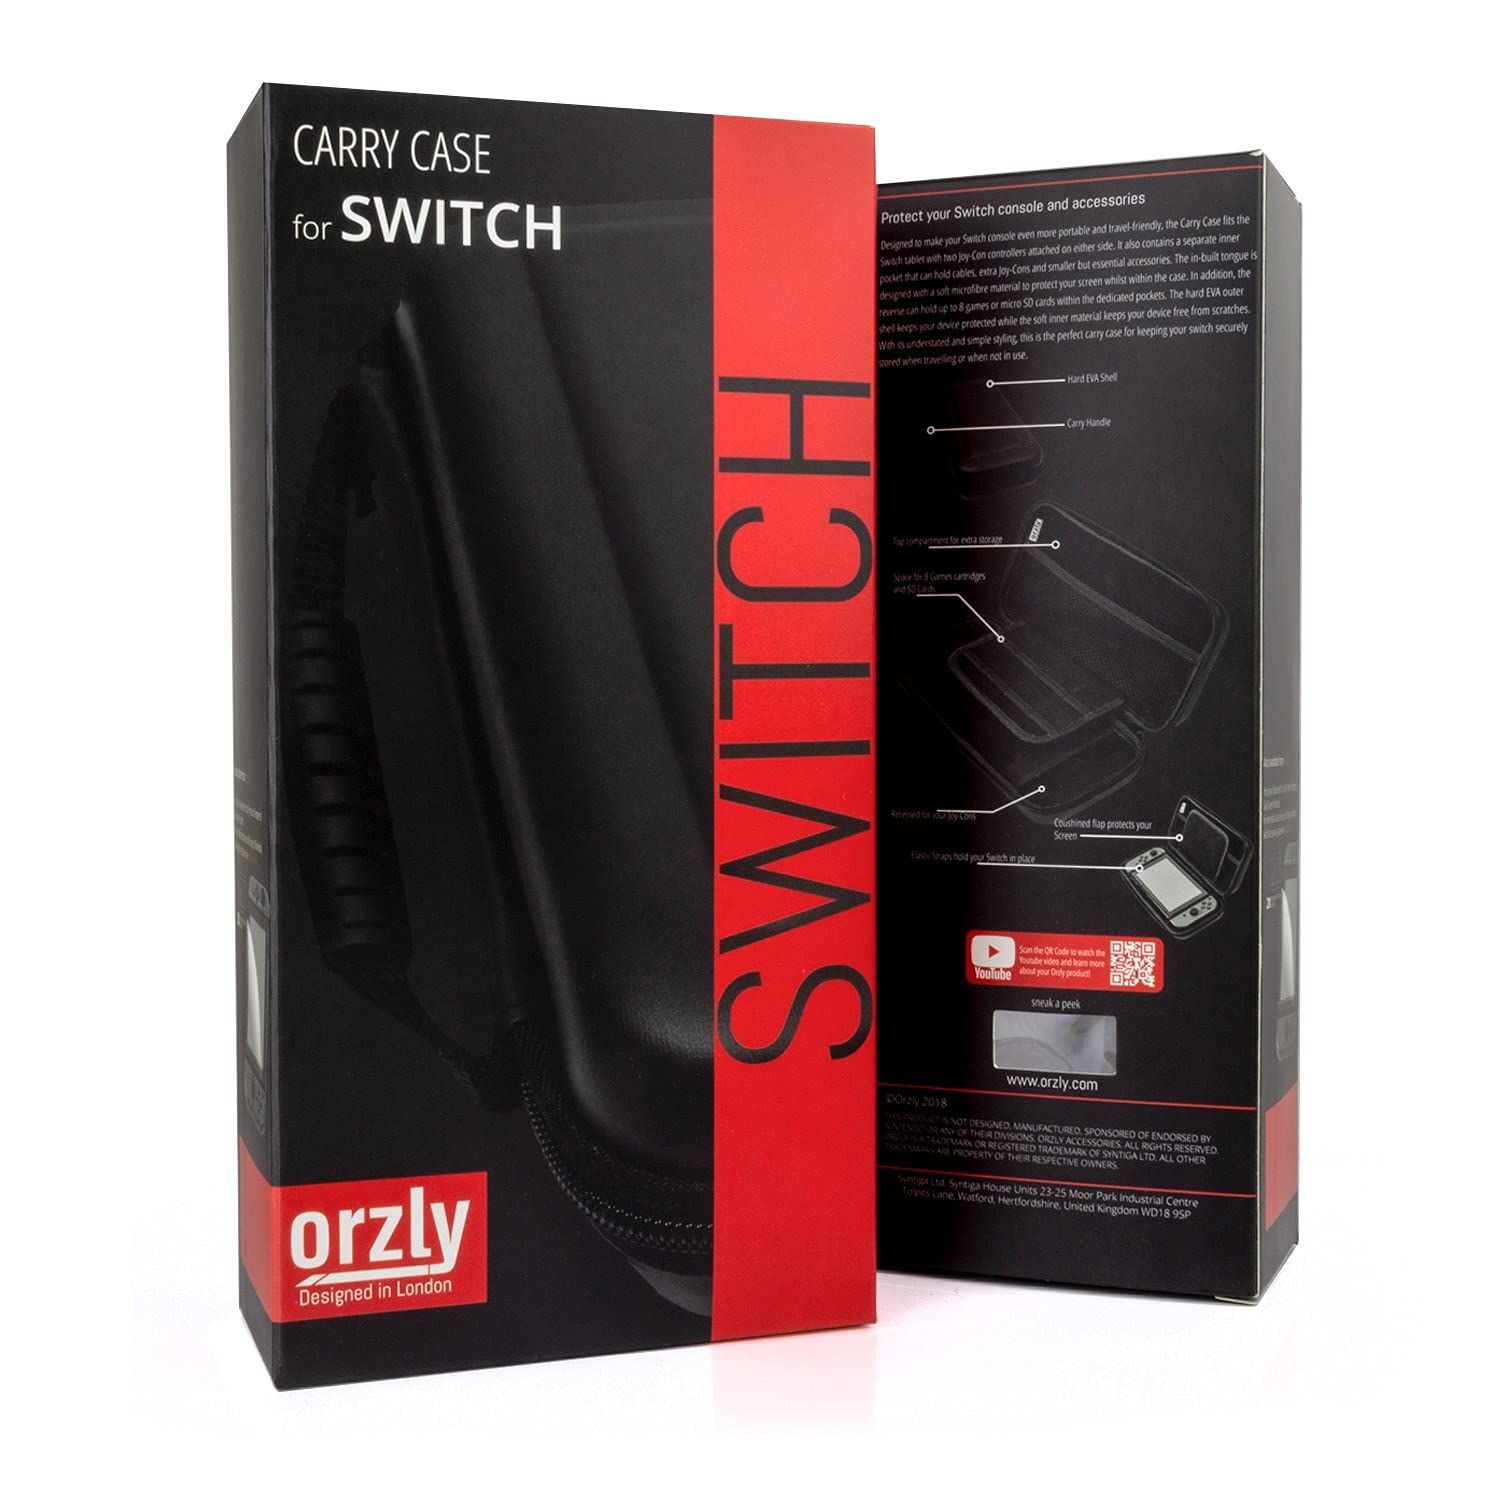 Orzly Carry Case box